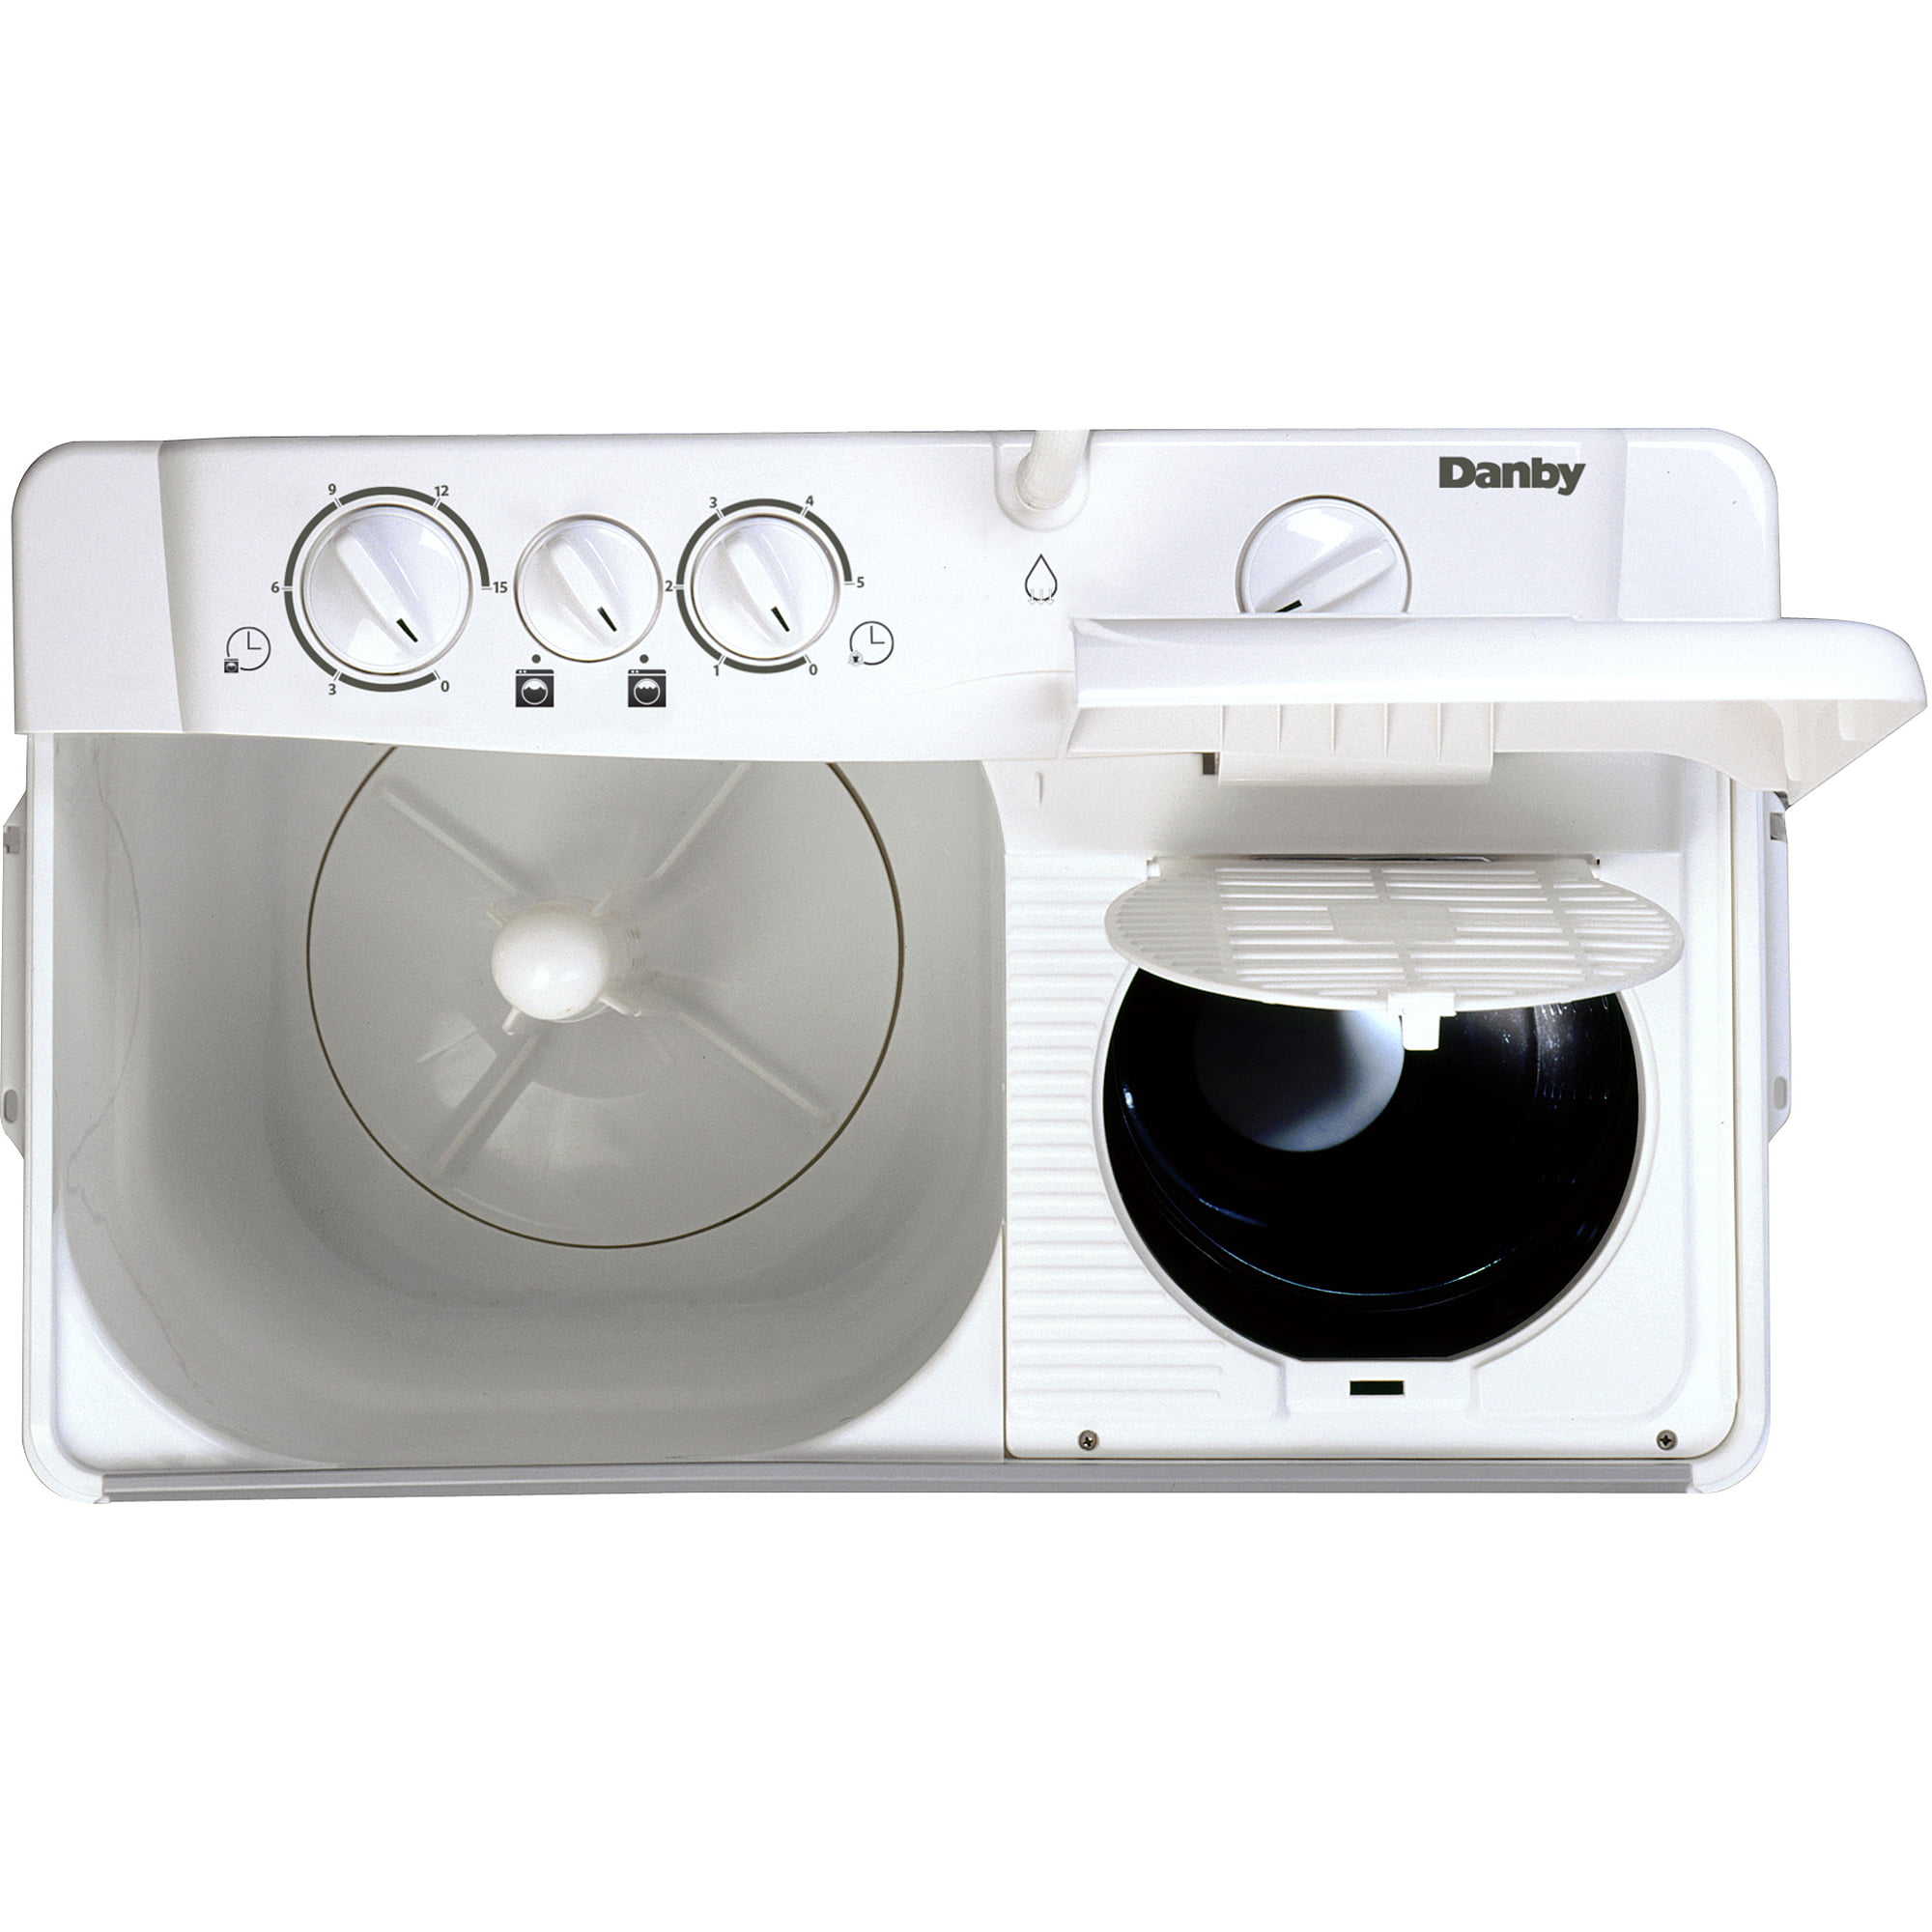 Danby 2 26 Cu Ft Twin Tub Washing Machine With Spin Dry White